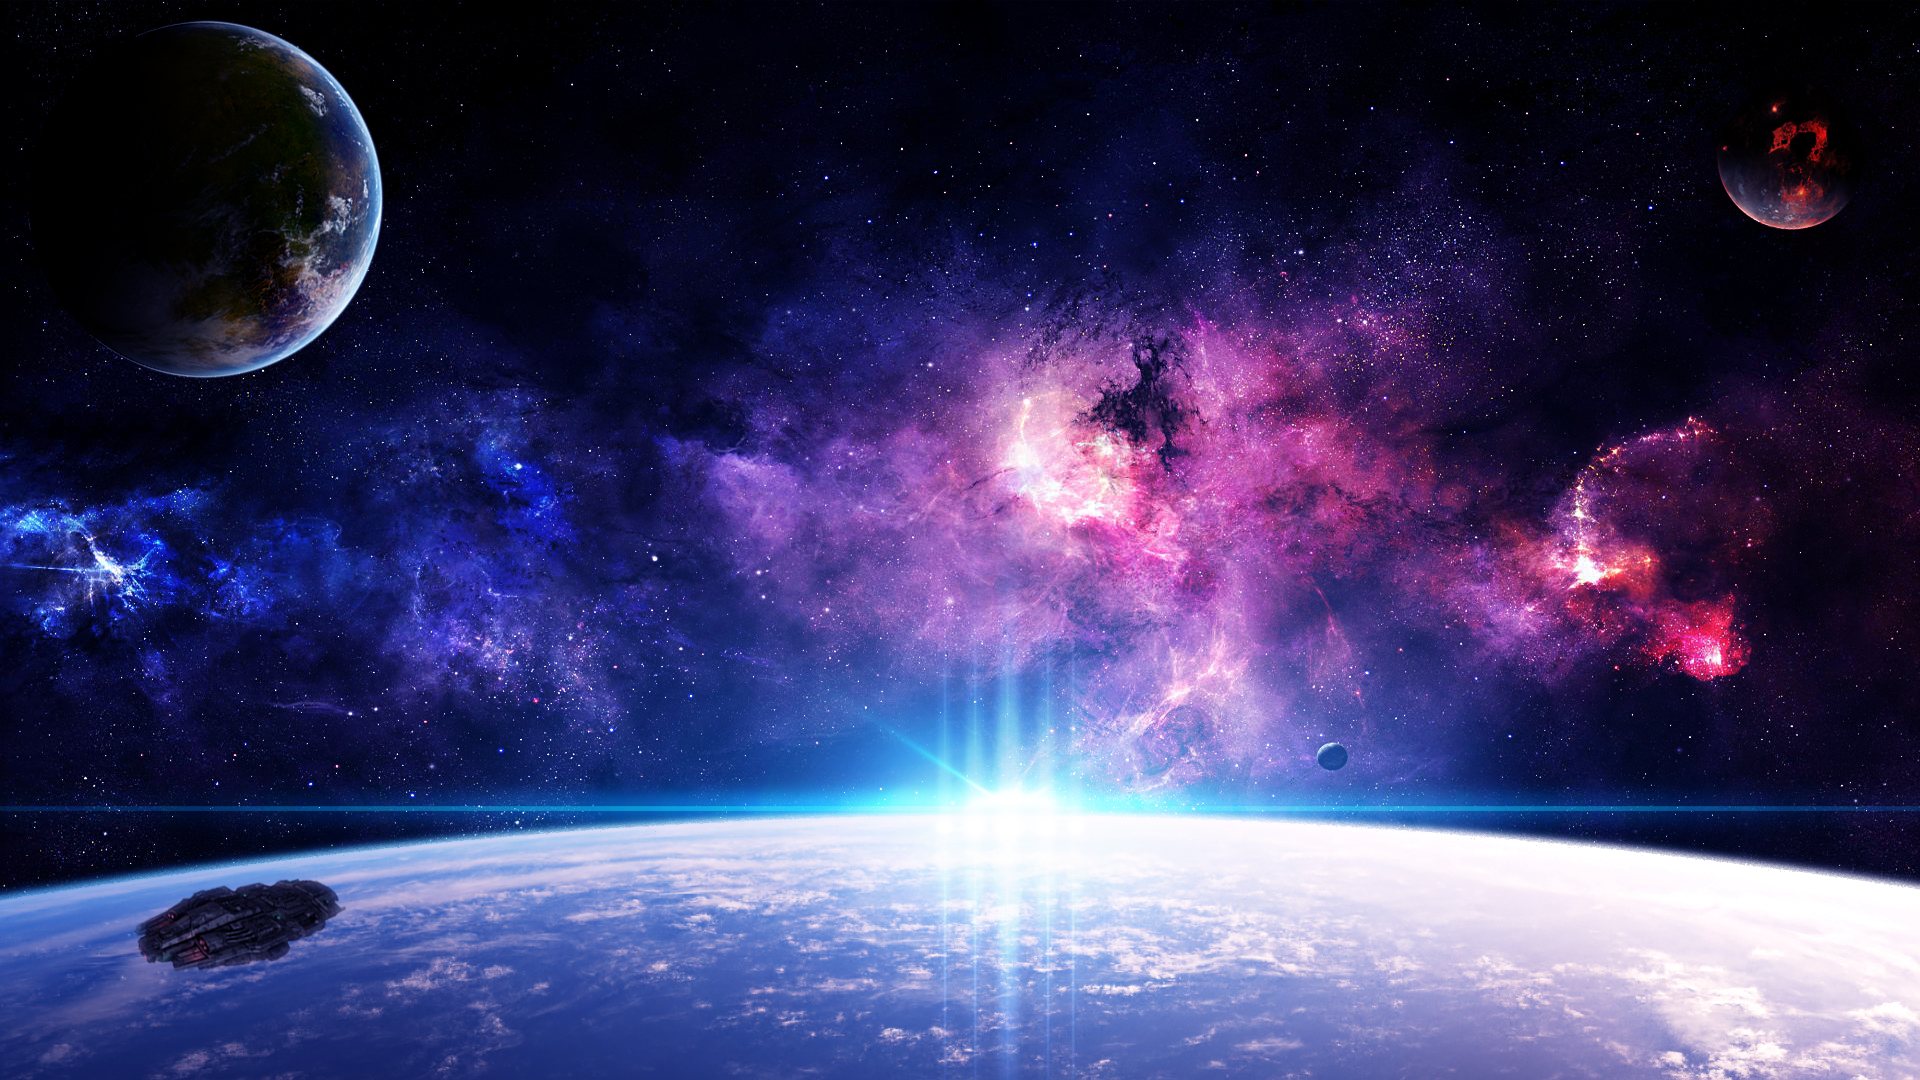 Free download Space Hd Wallpapers 1080P Best Wallpaper Background  [1920x1080] for your Desktop, Mobile & Tablet | Explore 73+ 1080p Space  Wallpapers | Space Hd Wallpapers 1080p, Space 1080p Wallpaper, Space  Wallpapers 1080p